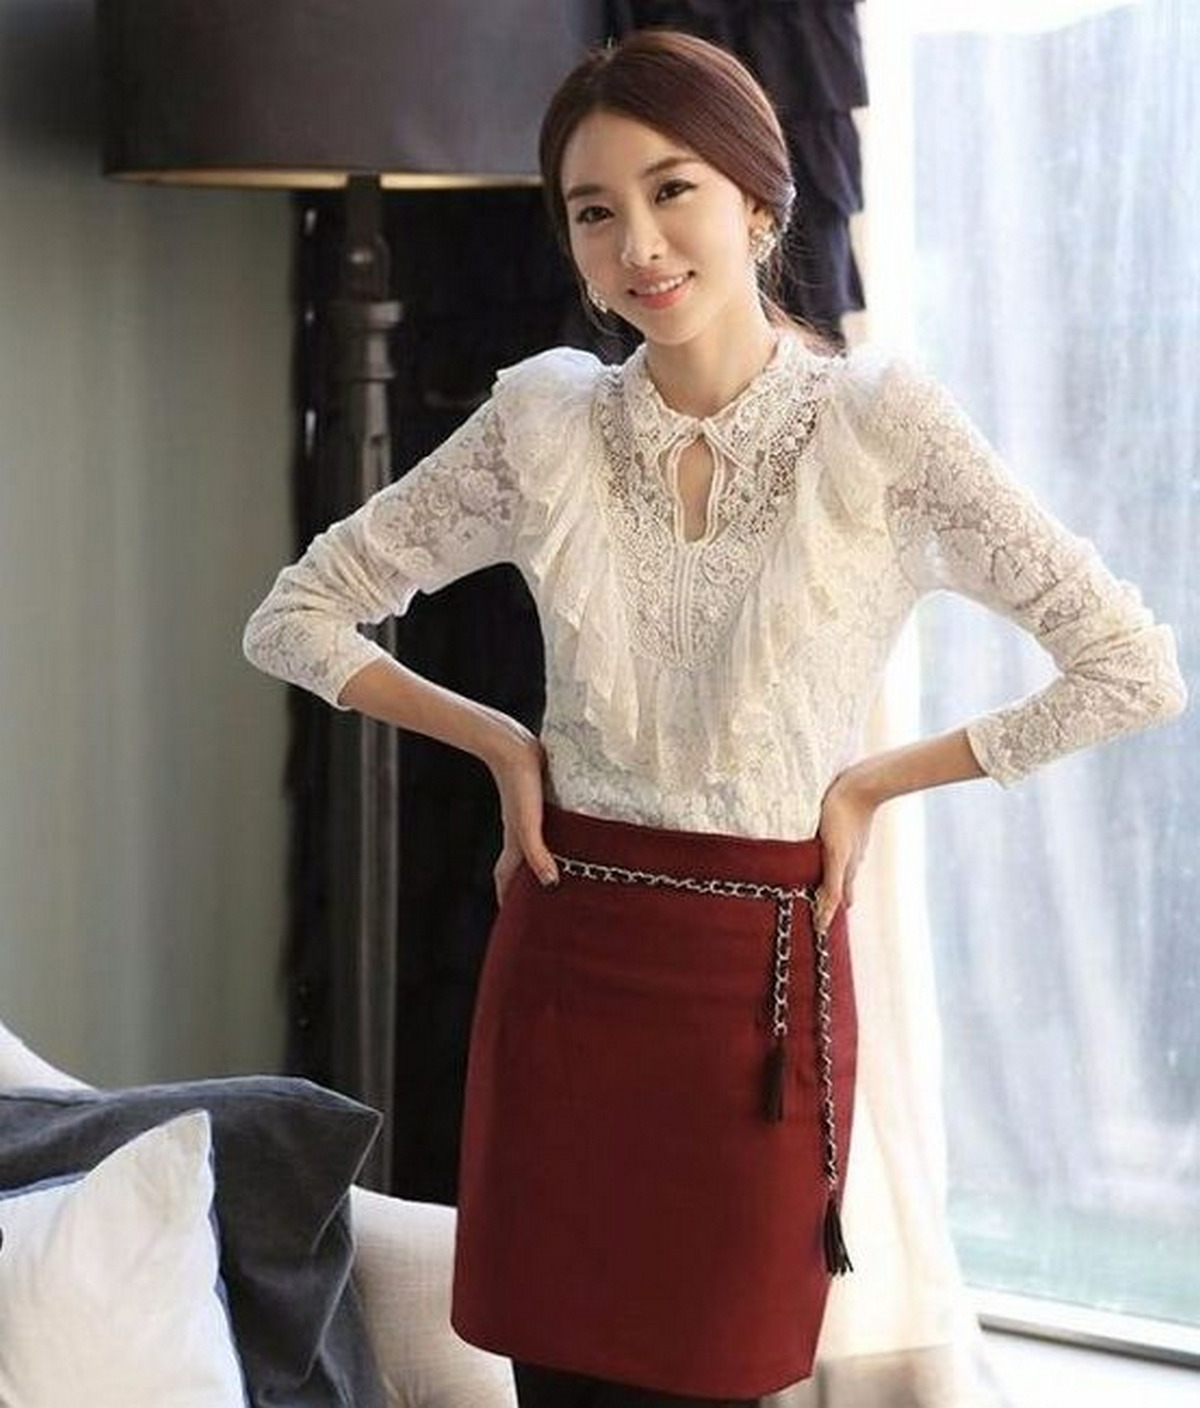 Ruffled And Lacy Blouses, Pencil Skirt